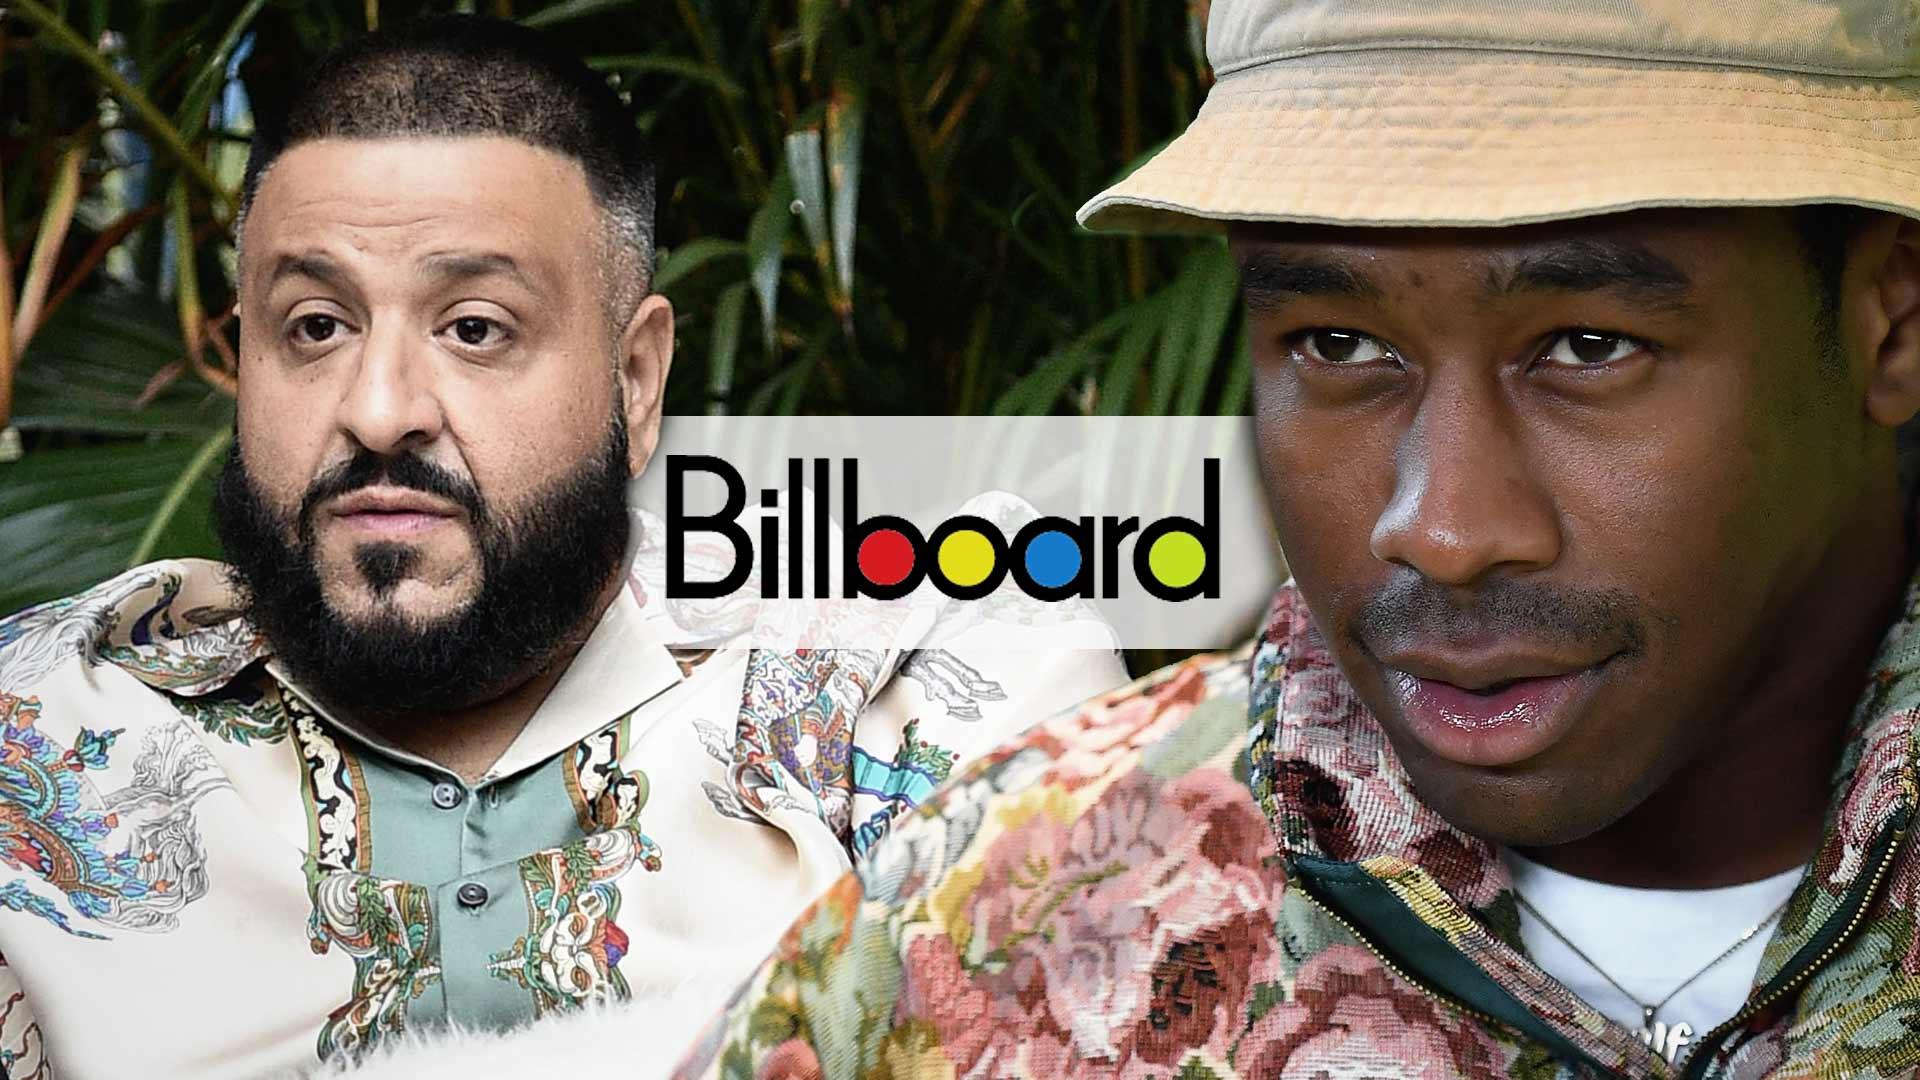 DJ Khaled Has No Beef With Tyler, the Creator Or His Label Over His Album, Billboard Is the Issue